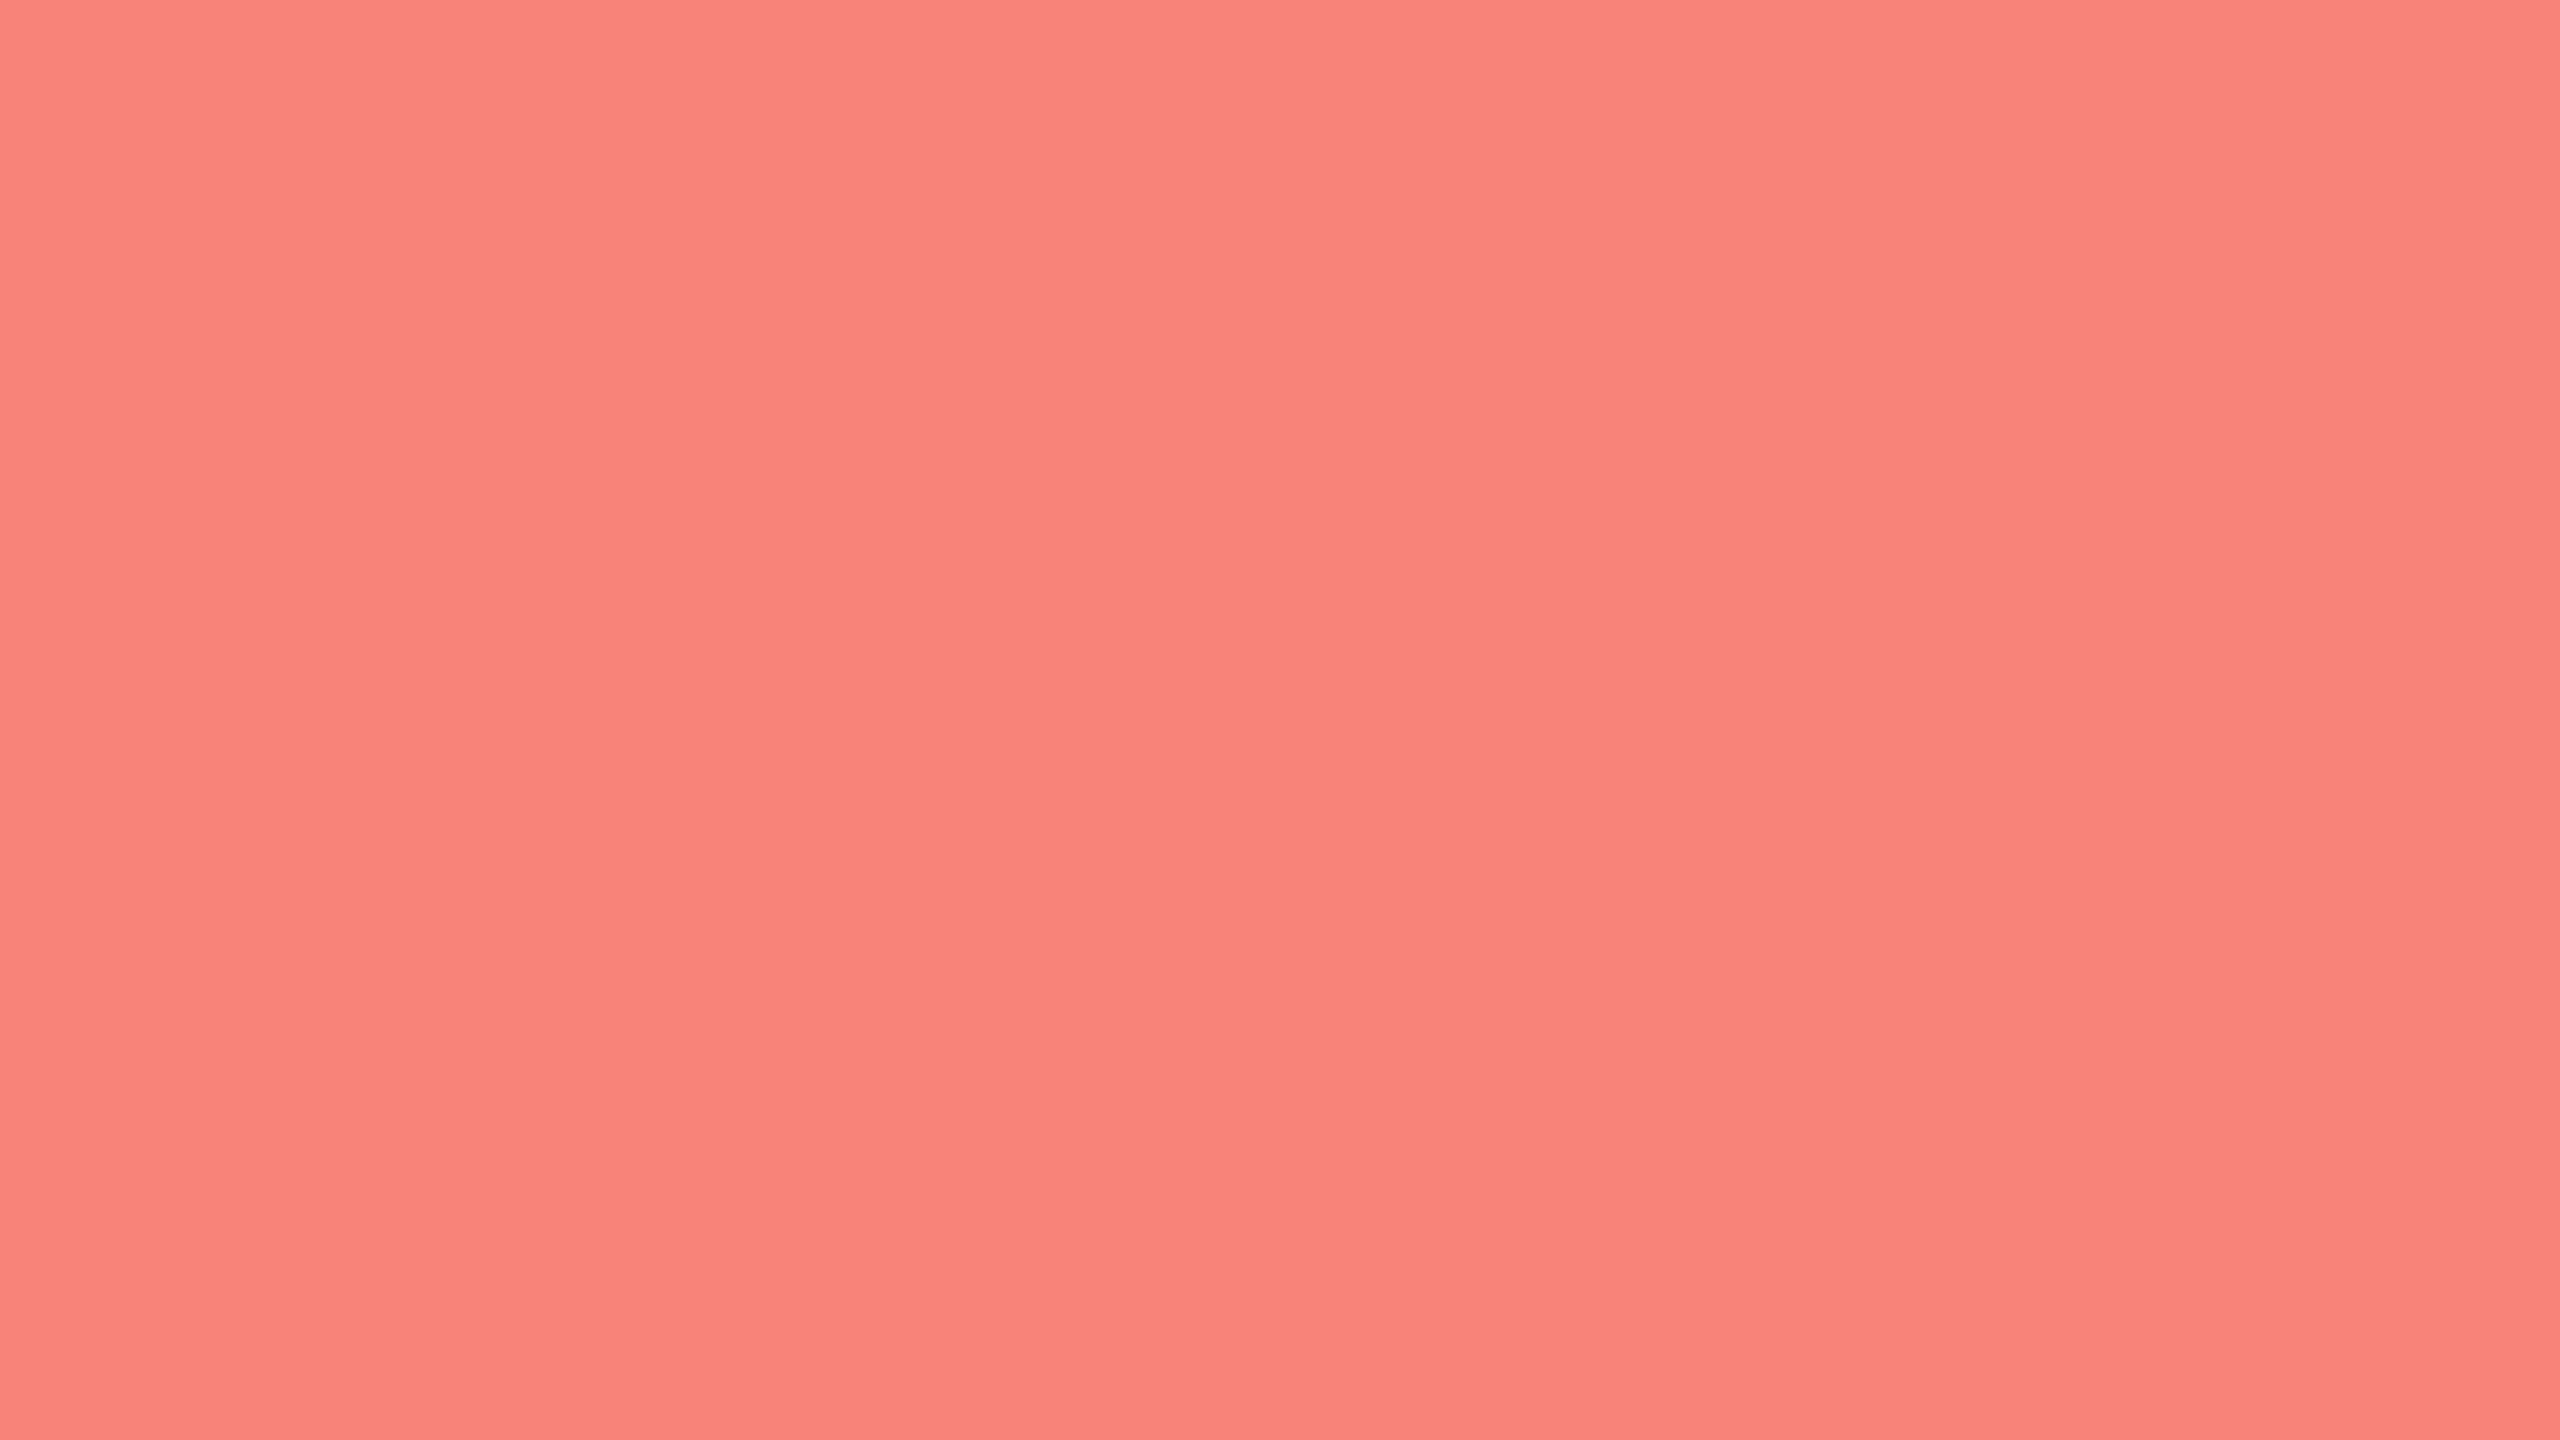 Coral And Teal Background 2560x1440 coral pink solid